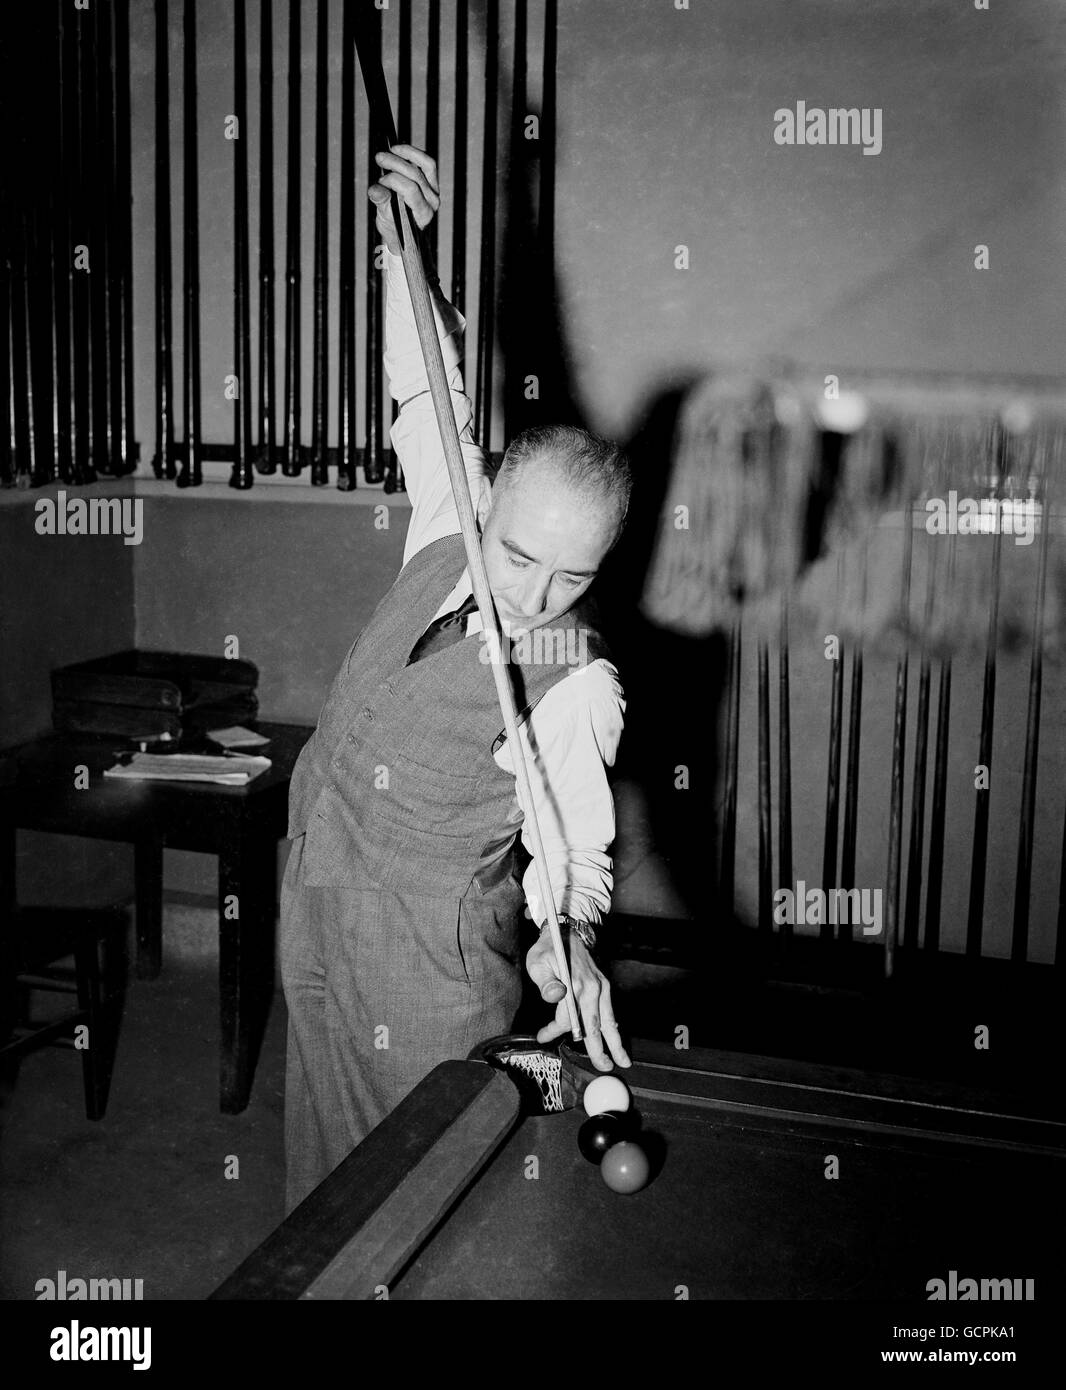 Mr. J.S. Stafford playing snooker, at the general section Sports and Athletics club. Stock Photo